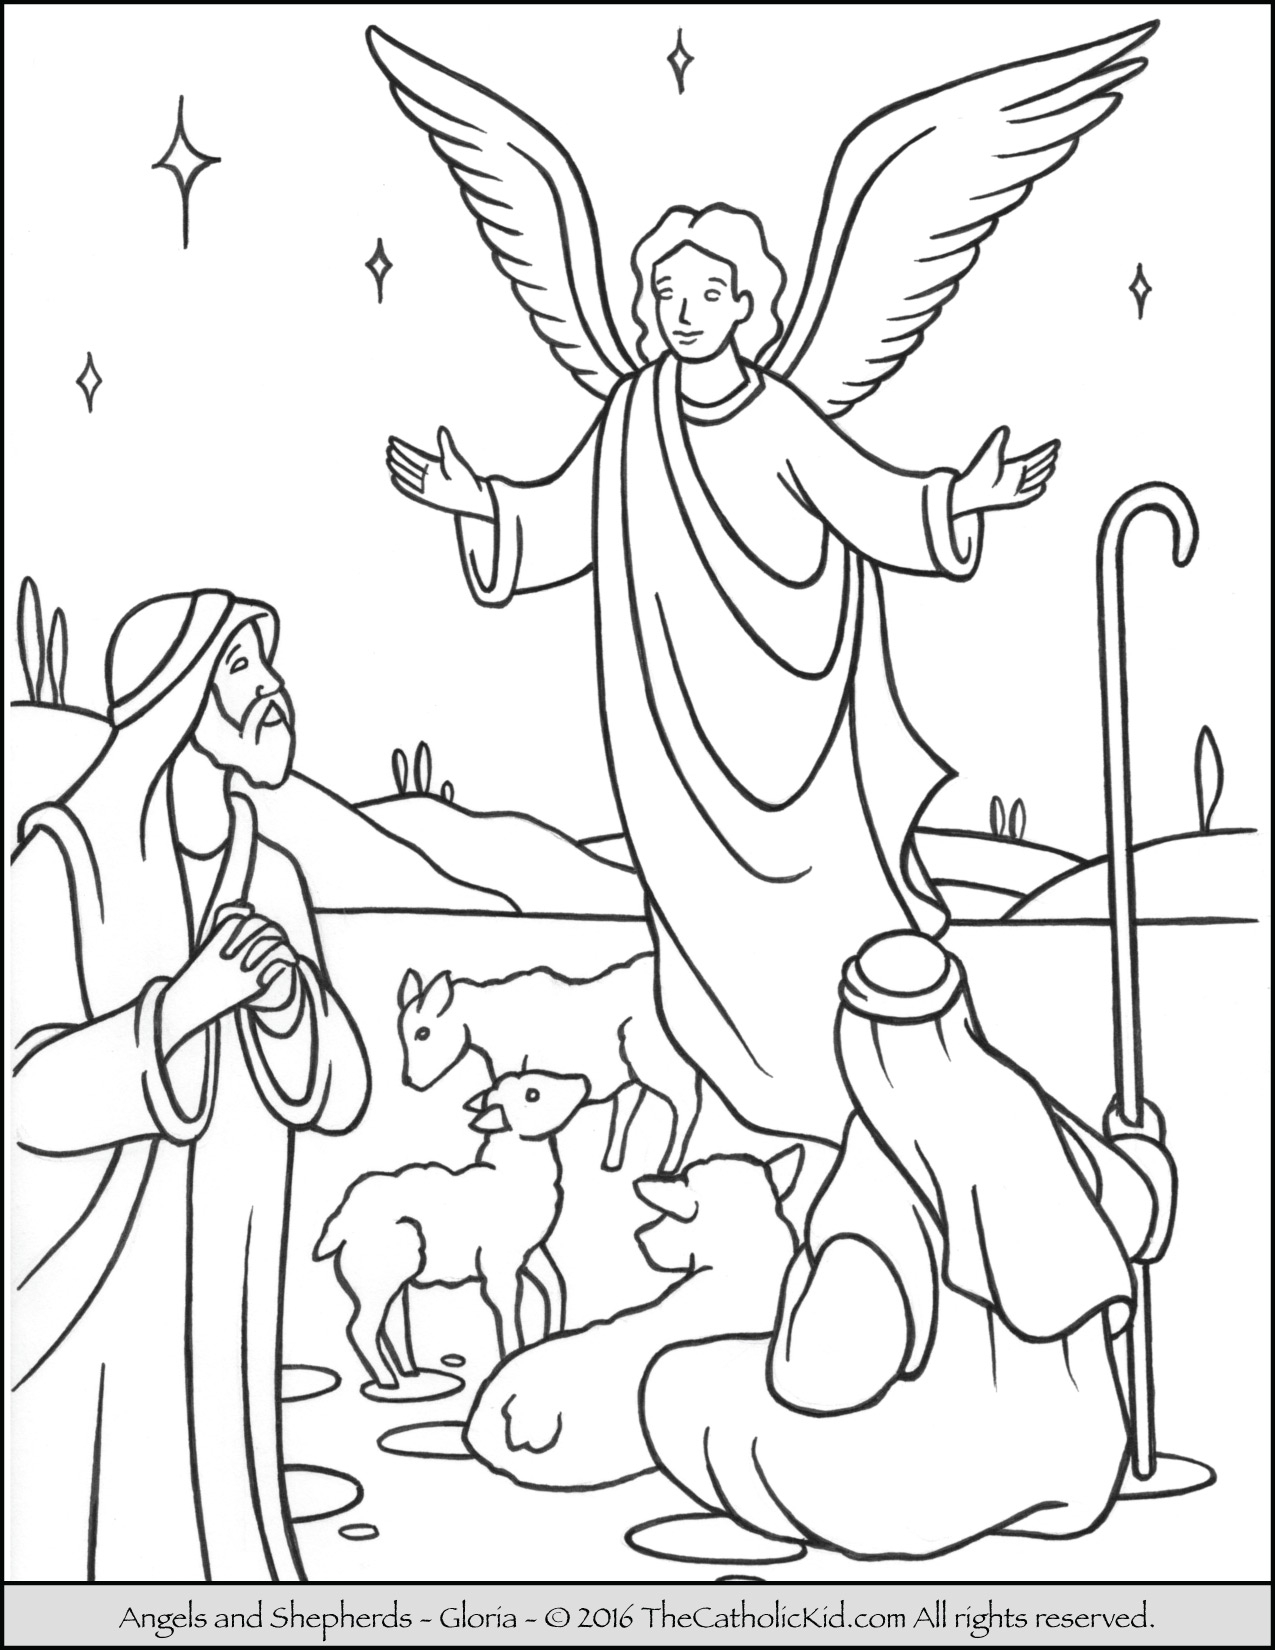 Coloring Pages Sheep And The Shepherd Shepherd Coloring Page At Getdrawings Free For Personal Use